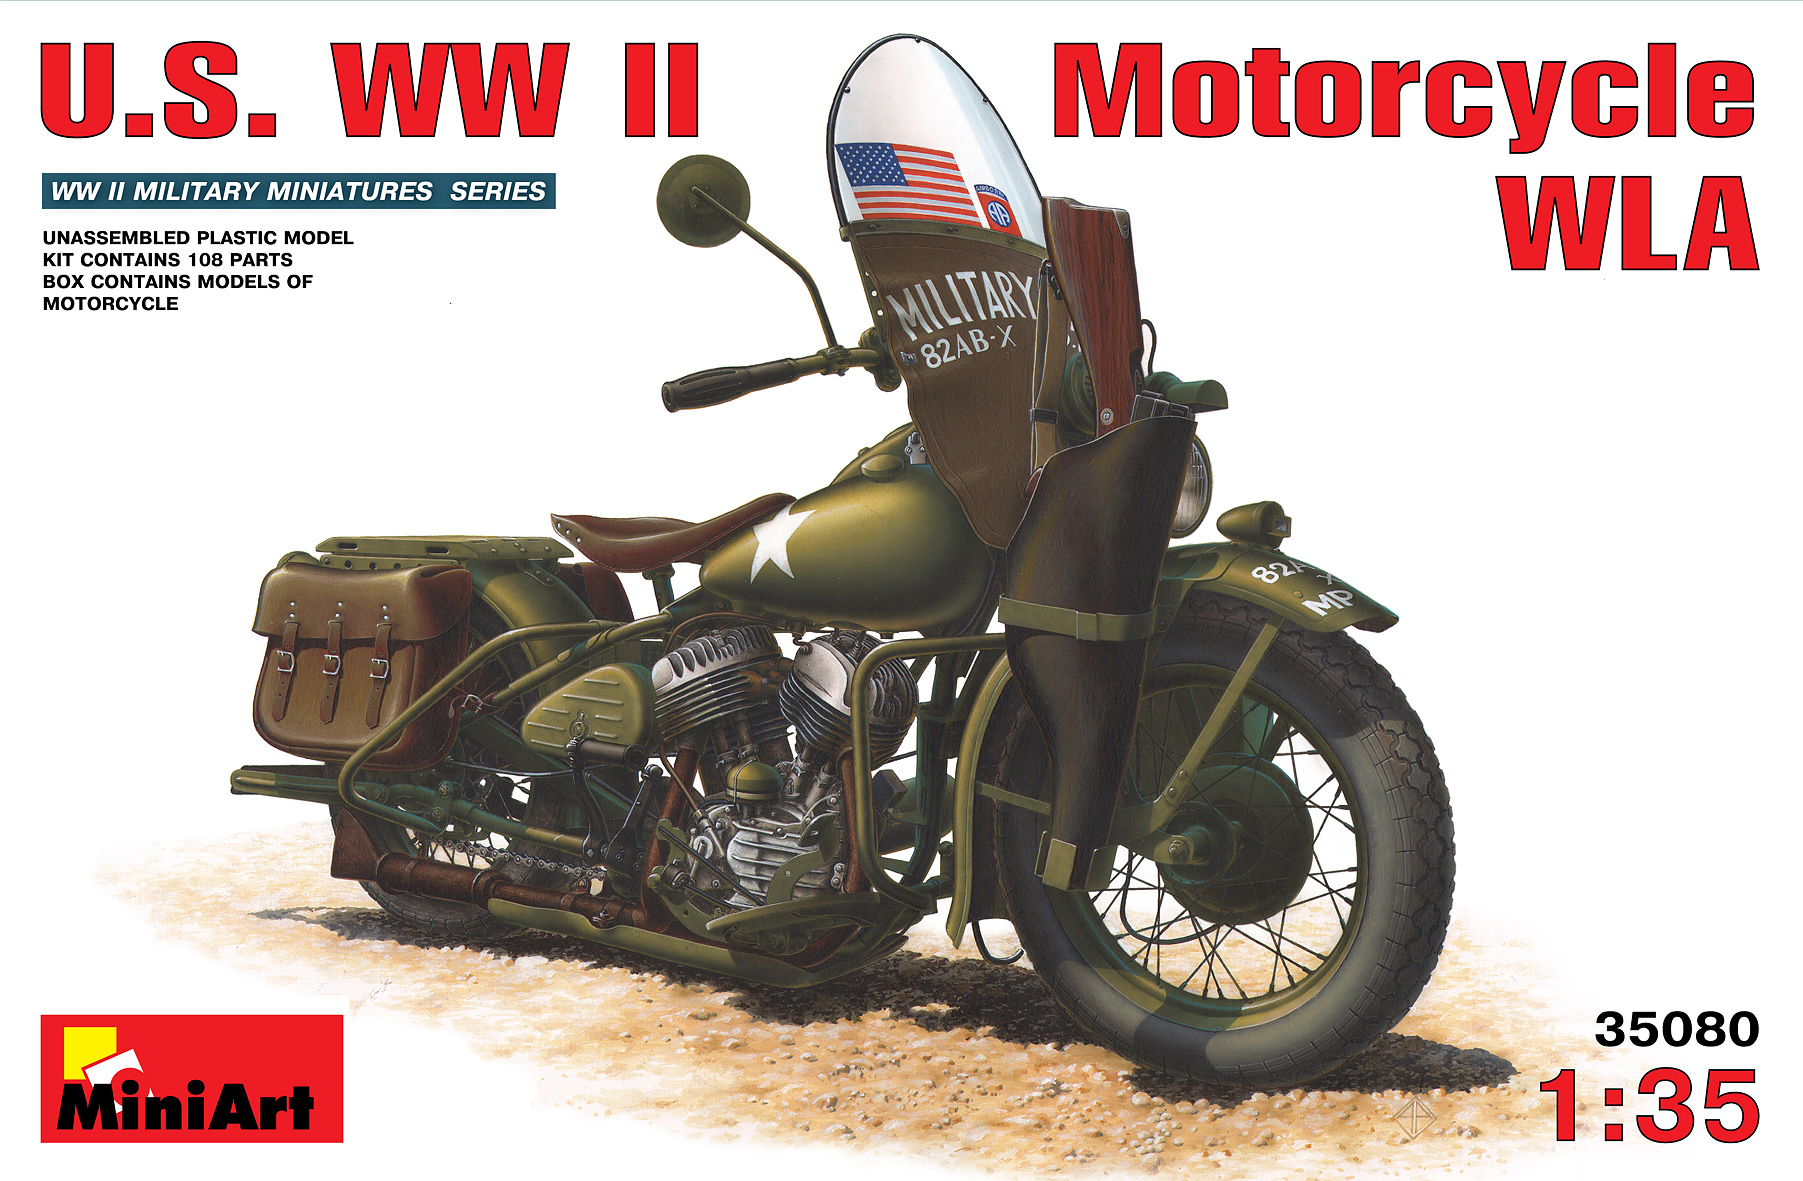 MiniArt 1/35 Scale U.S.Motorcycle WLA with Rider Plastic Model Building Kit # 35172 